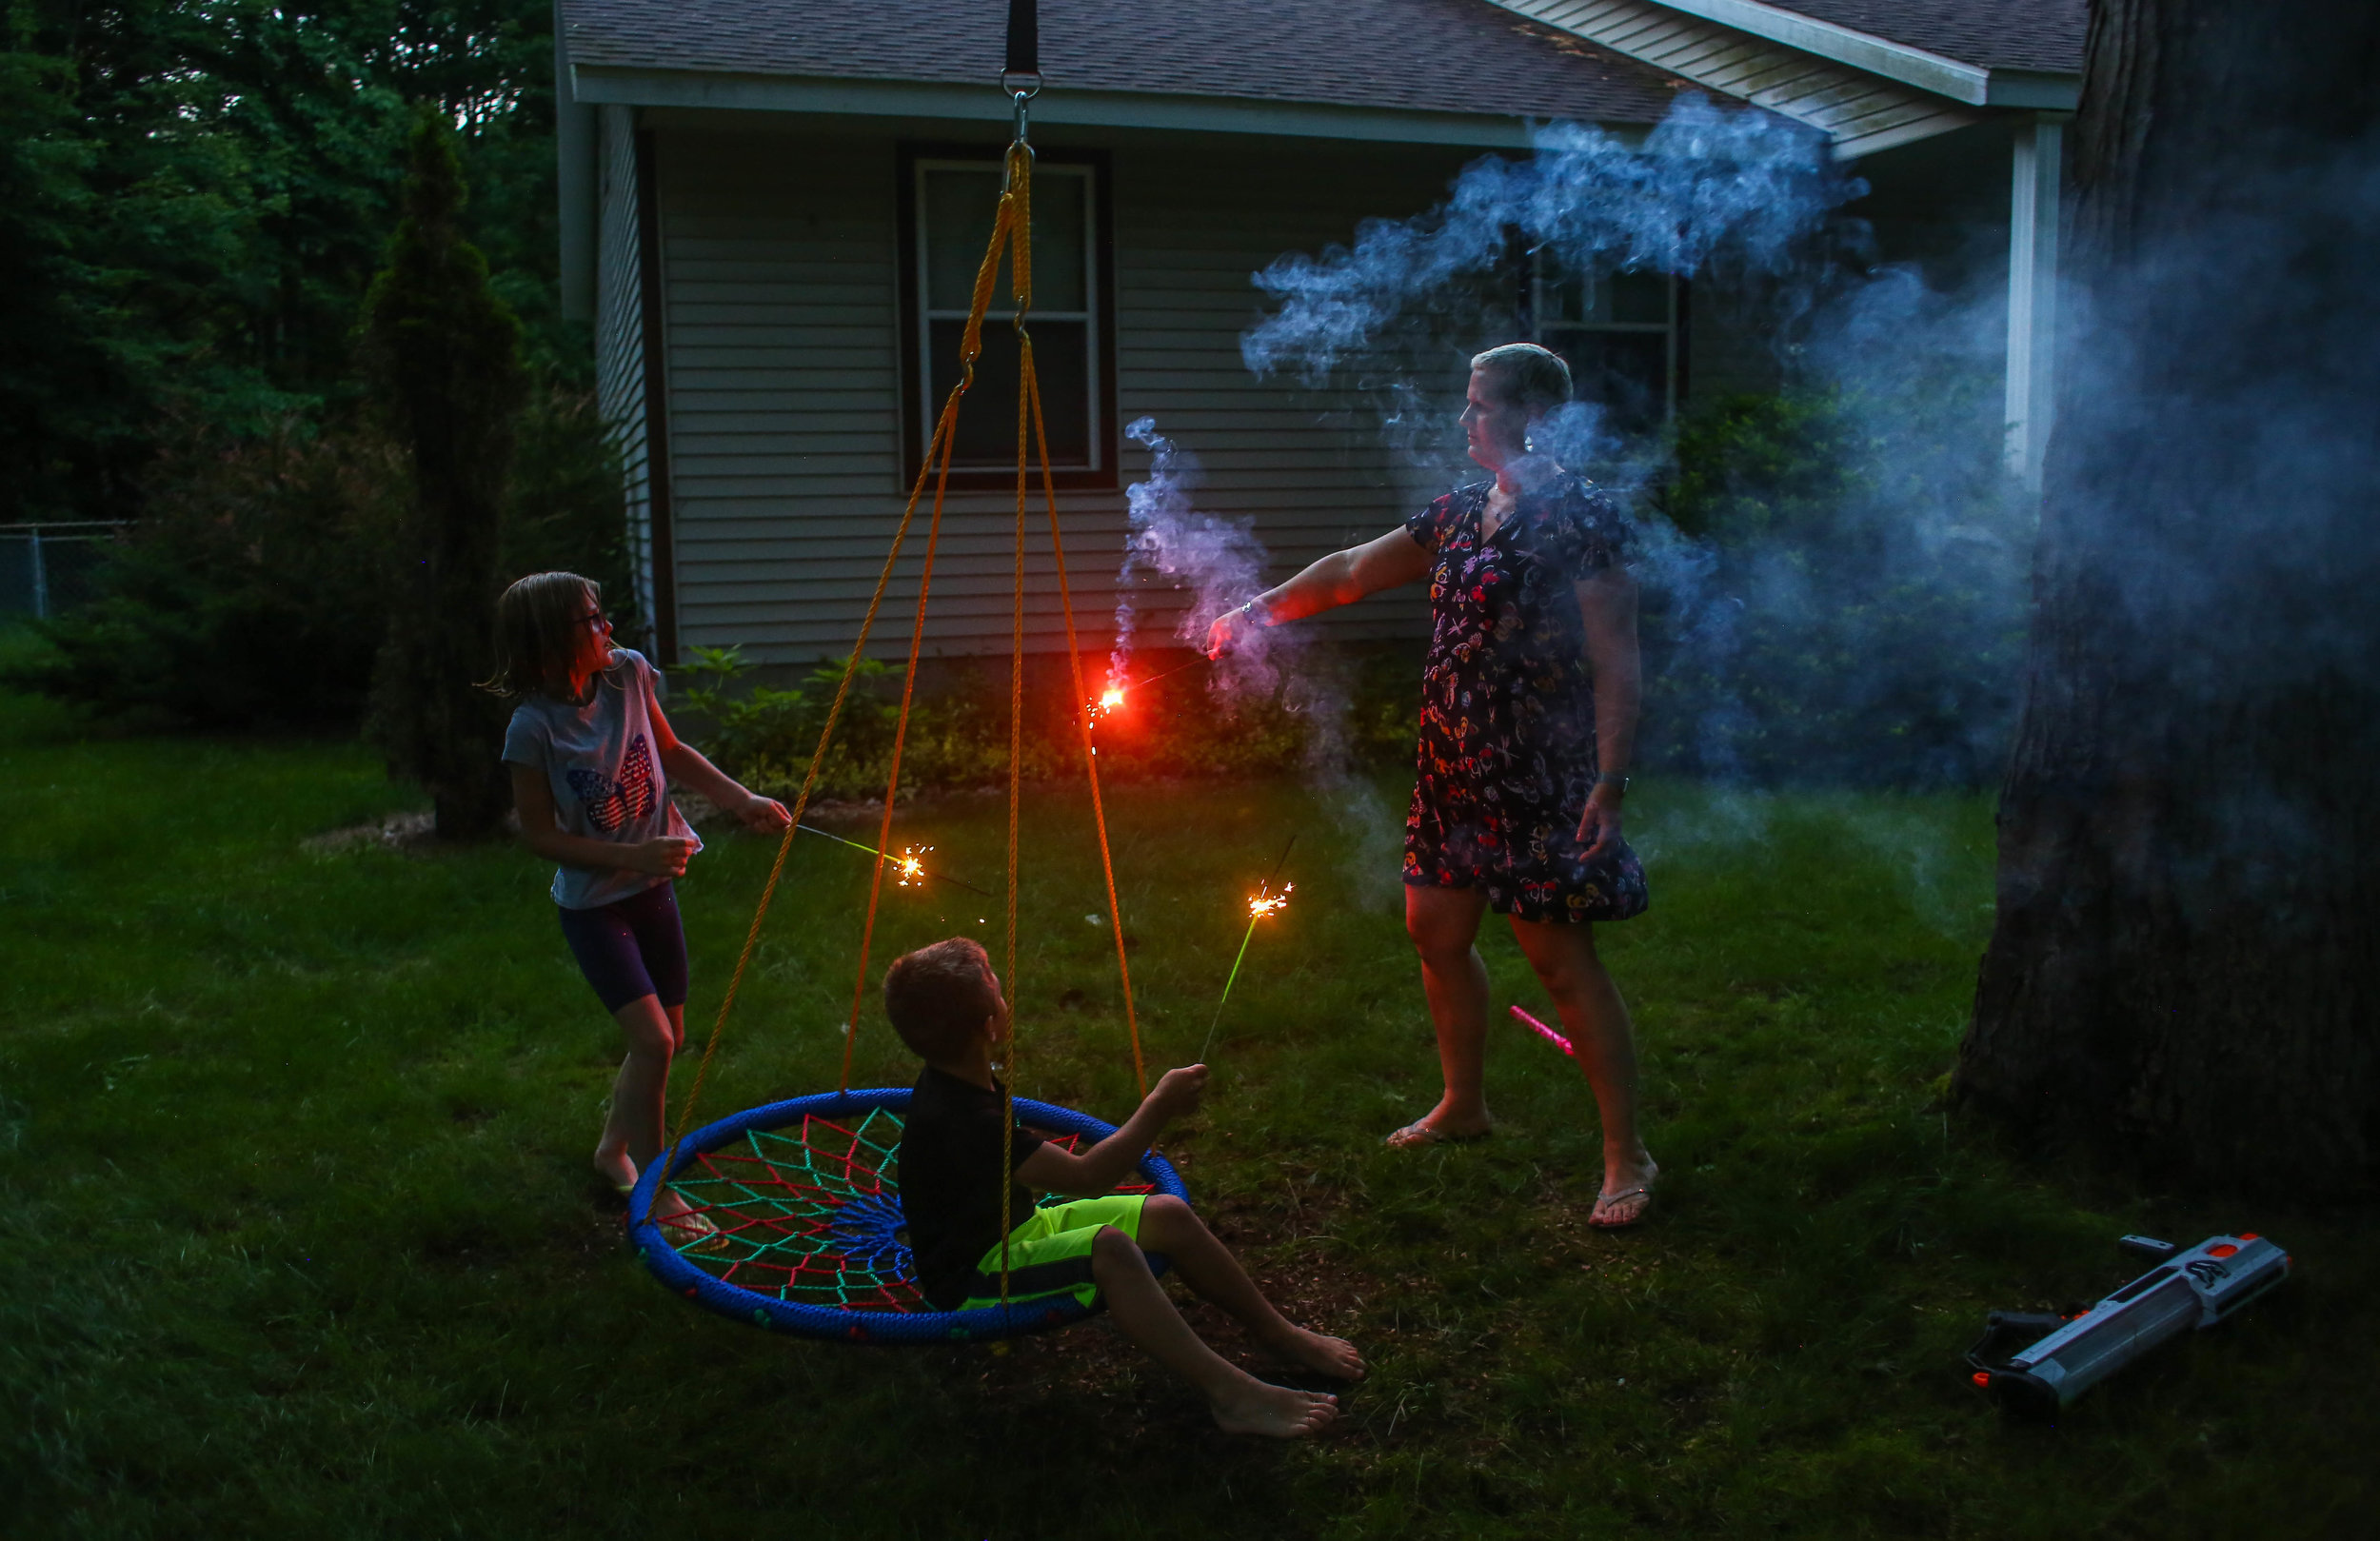  Amanda Cihak and her children Cameron and Kayla celebrate the Fourth of July early with some sparklers in their front yard, in Muskegon, Michigan on Sunday, June 30, 2019. 